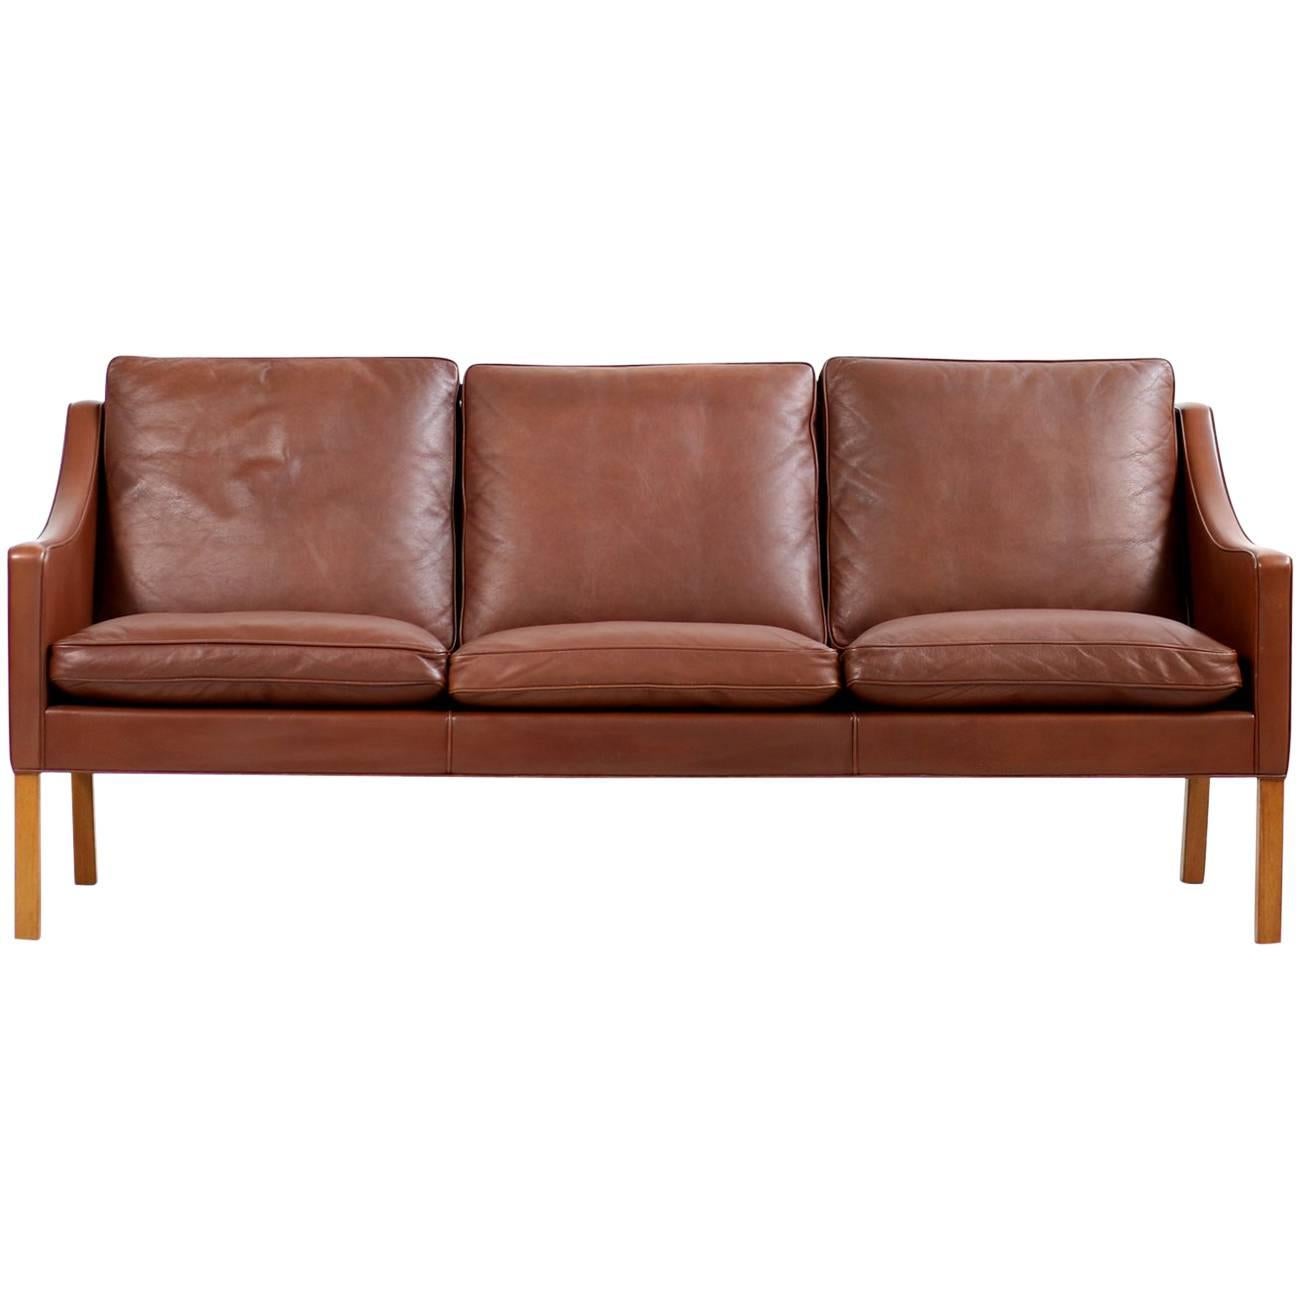 Beautiful 1960s Borge Mogensen 2209 lounge sofa, cognac or brown leather, fantastic condition, cushions were reupholstered for more comfort, solid legs.